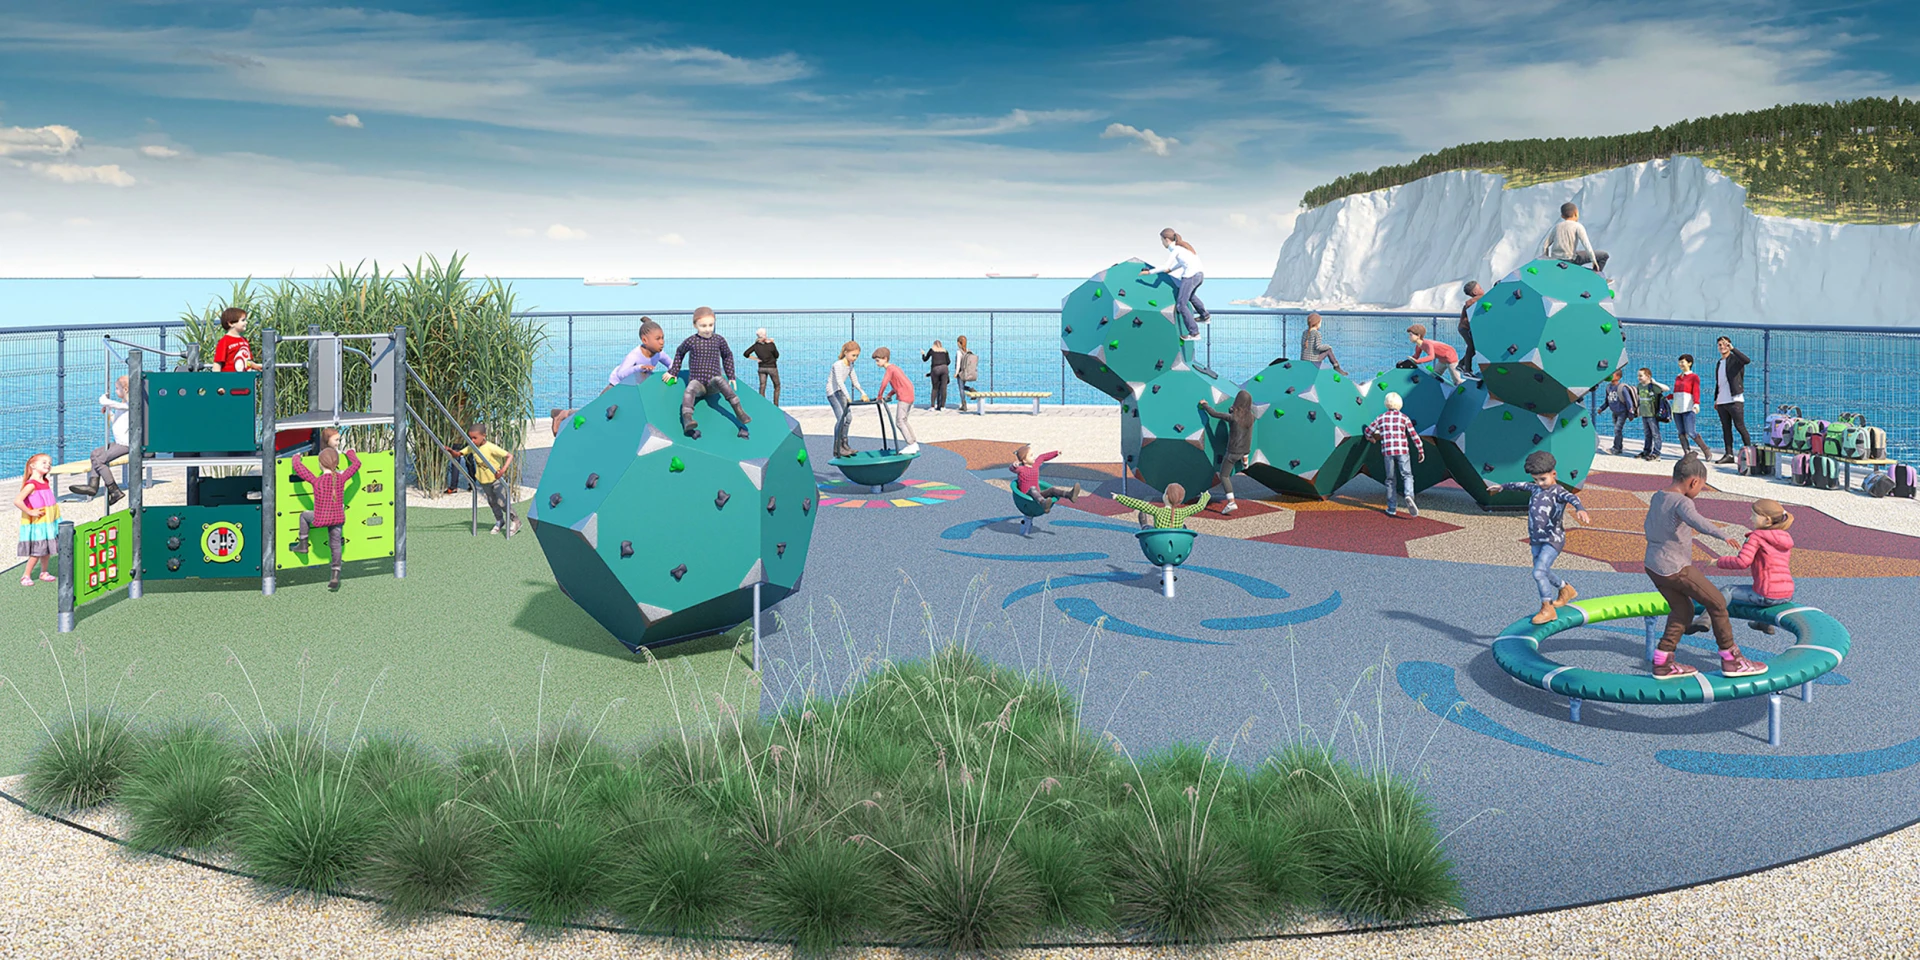 Concept design for a Low Carbon Emission School-Age playground